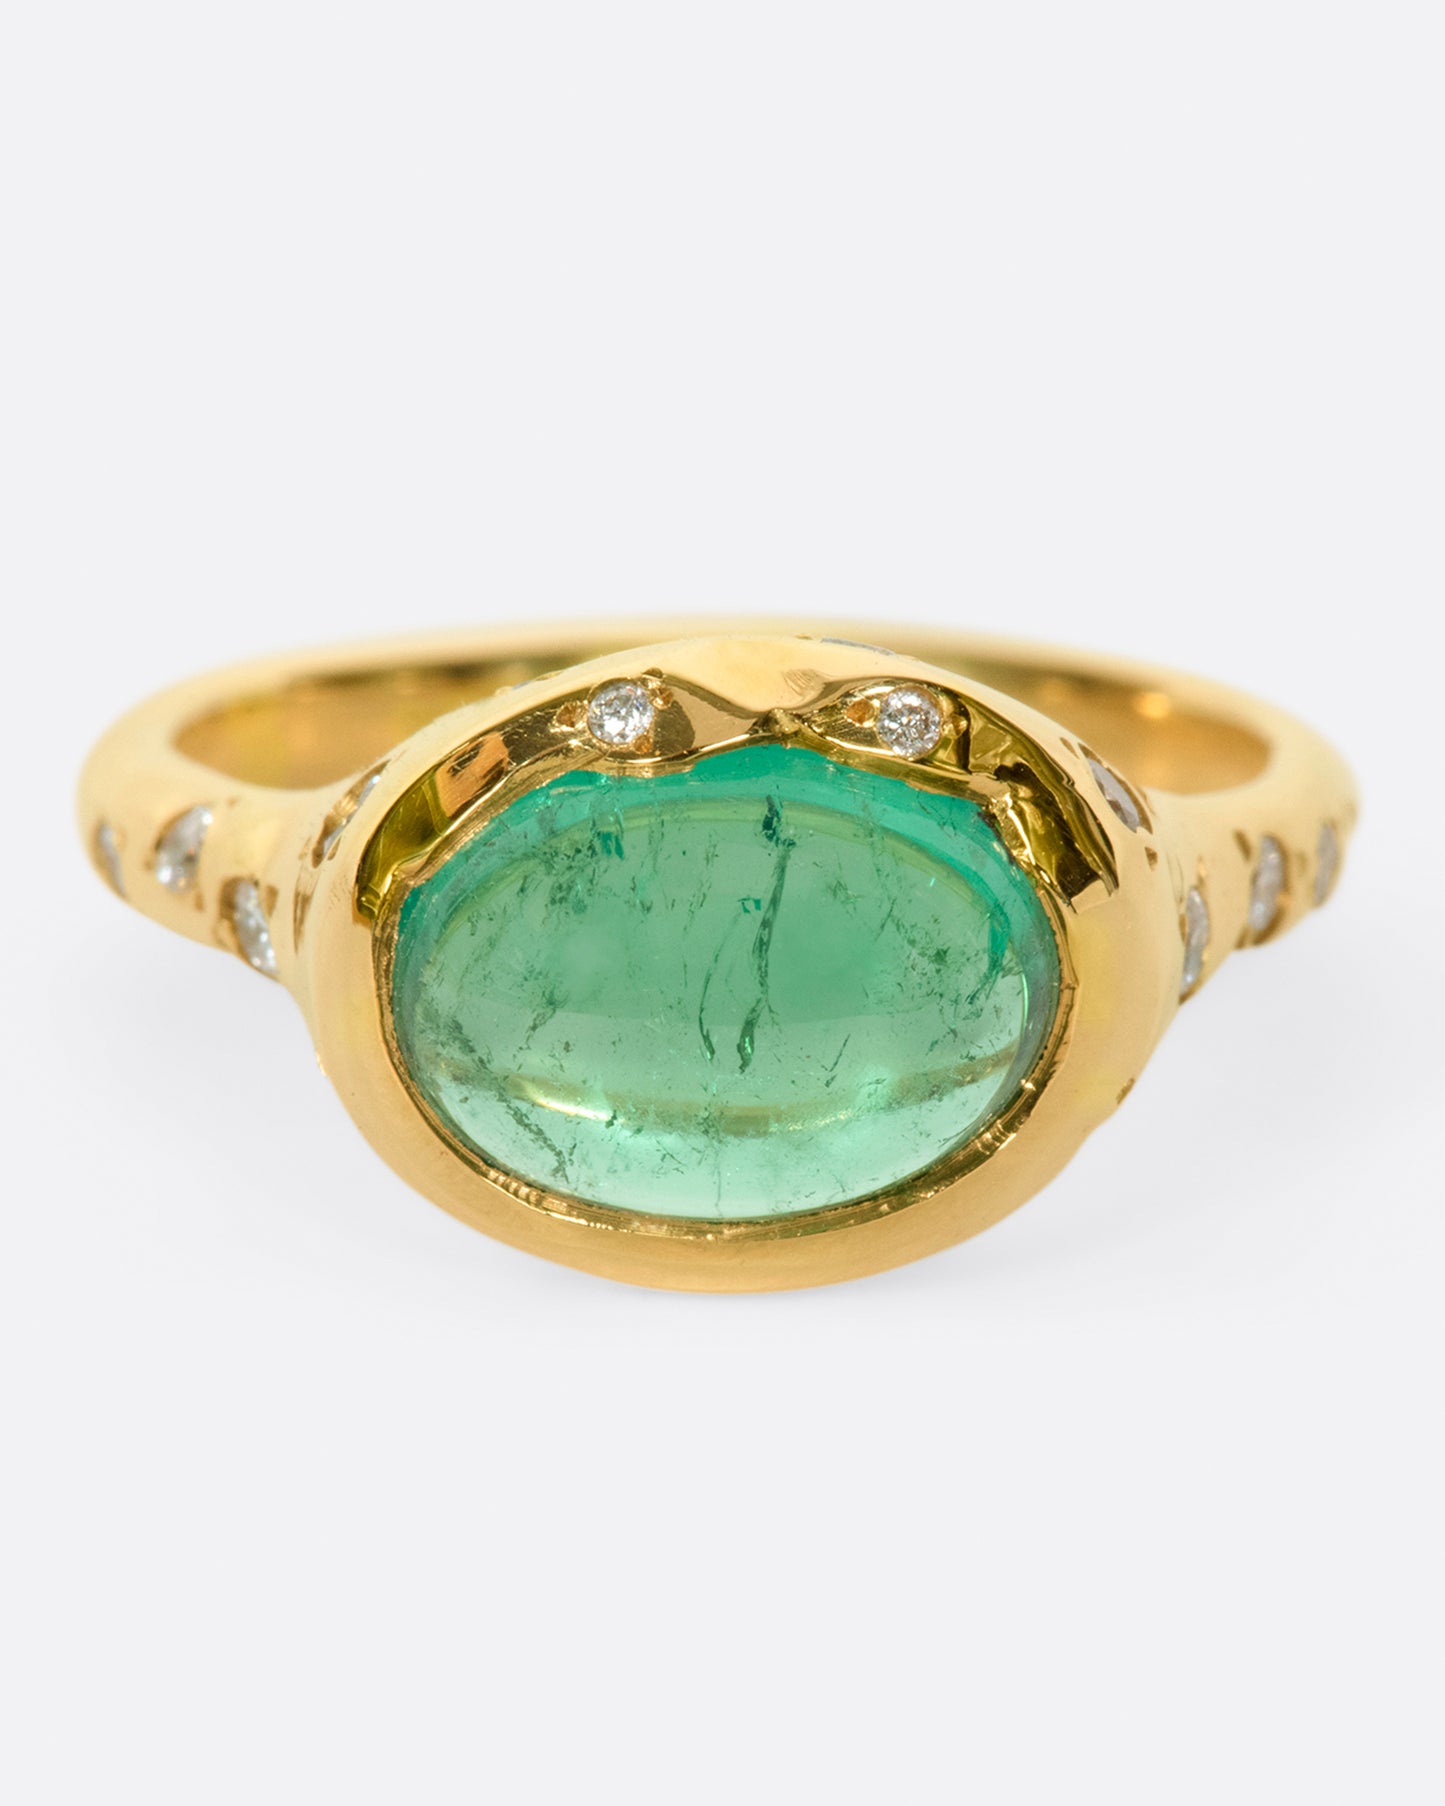 A bright green emerald cabochon sits at the center of this signet style ring.